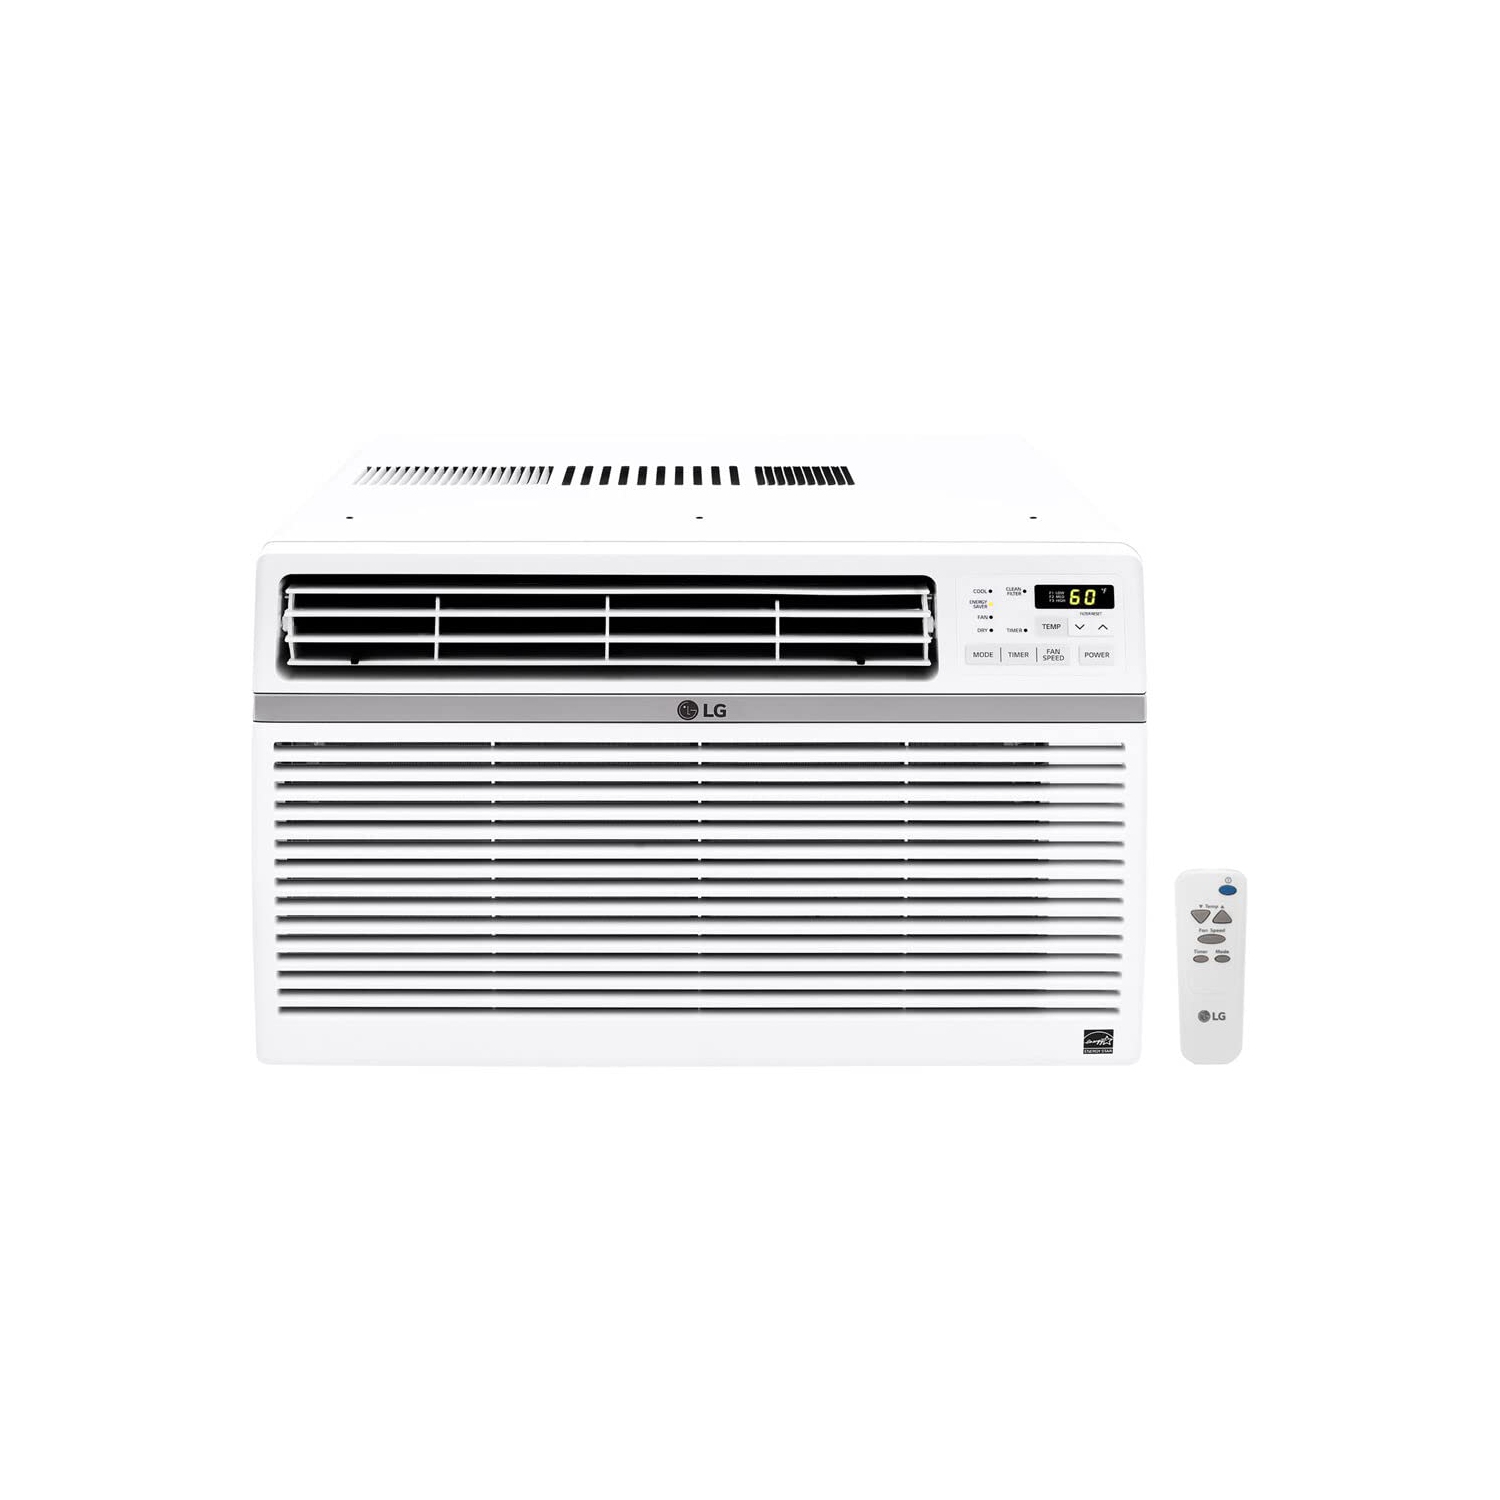 LG 10,000 BTU Window Air Conditioner, Cools 450 Sq.Ft. (18' x 25' Room Size), Quiet Operation, Electronic Control with Remote, 3 Cooling & Fan Speeds, ENERGY STAR®, Auto Restart, 1